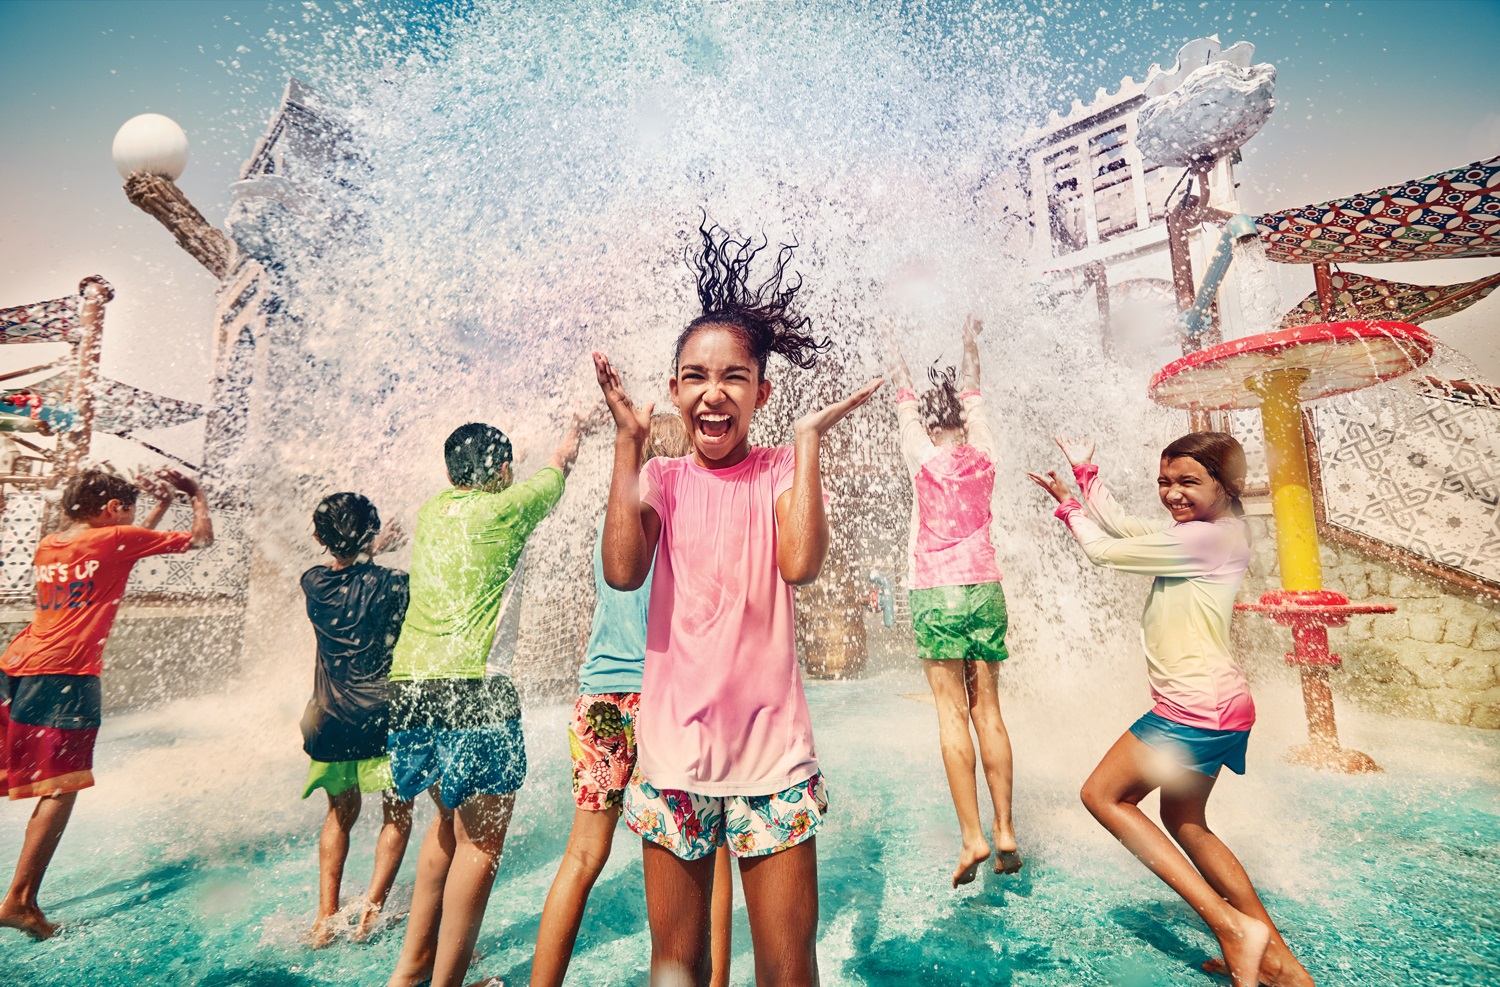 Cool Down This Spring Break With Yas Waterworld's Exciting Rides, Slides And Attractions